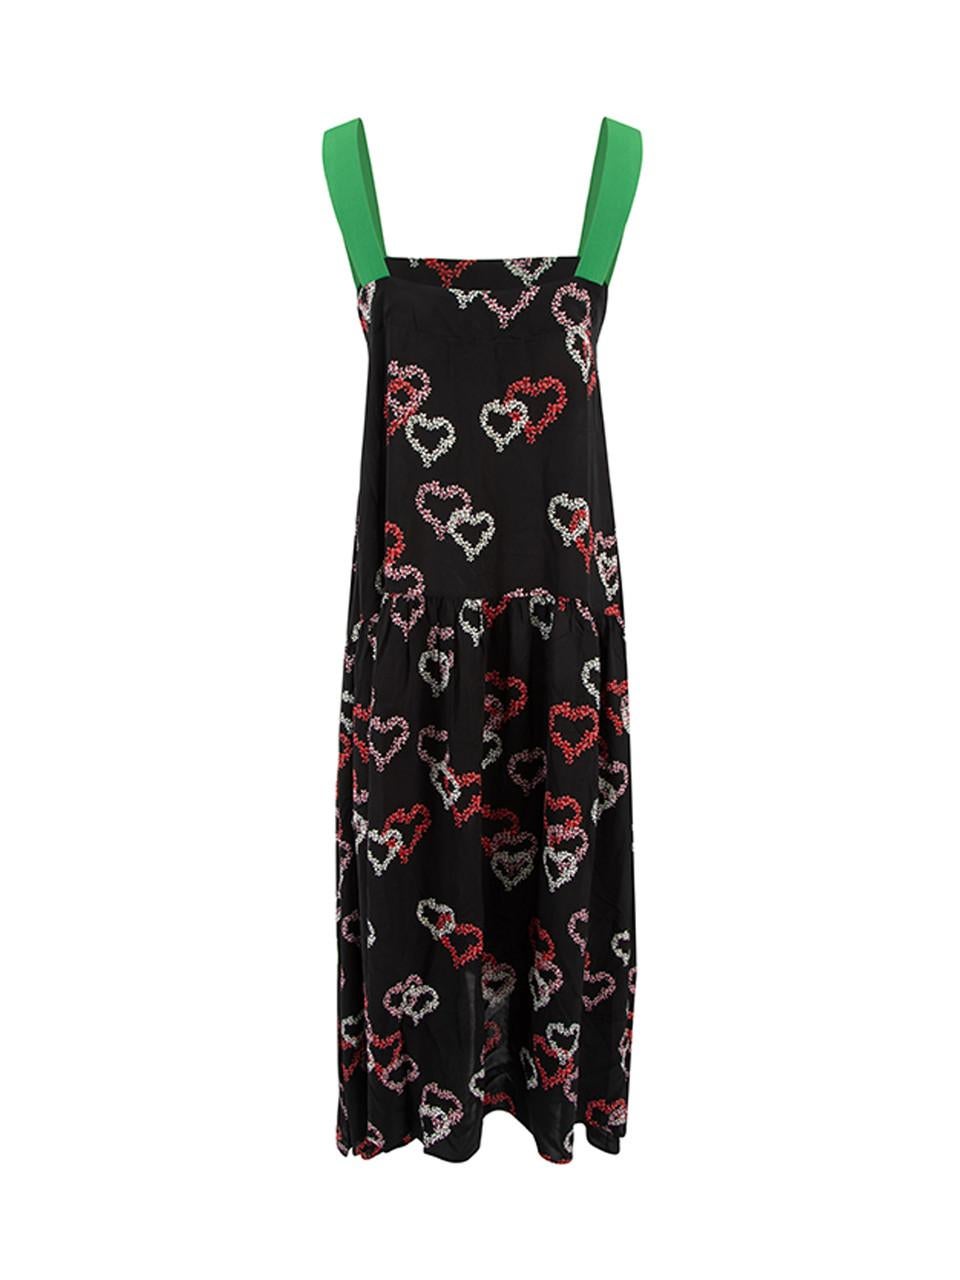 Sandro Heart Patterned Midi Dress Size M In Good Condition In London, GB